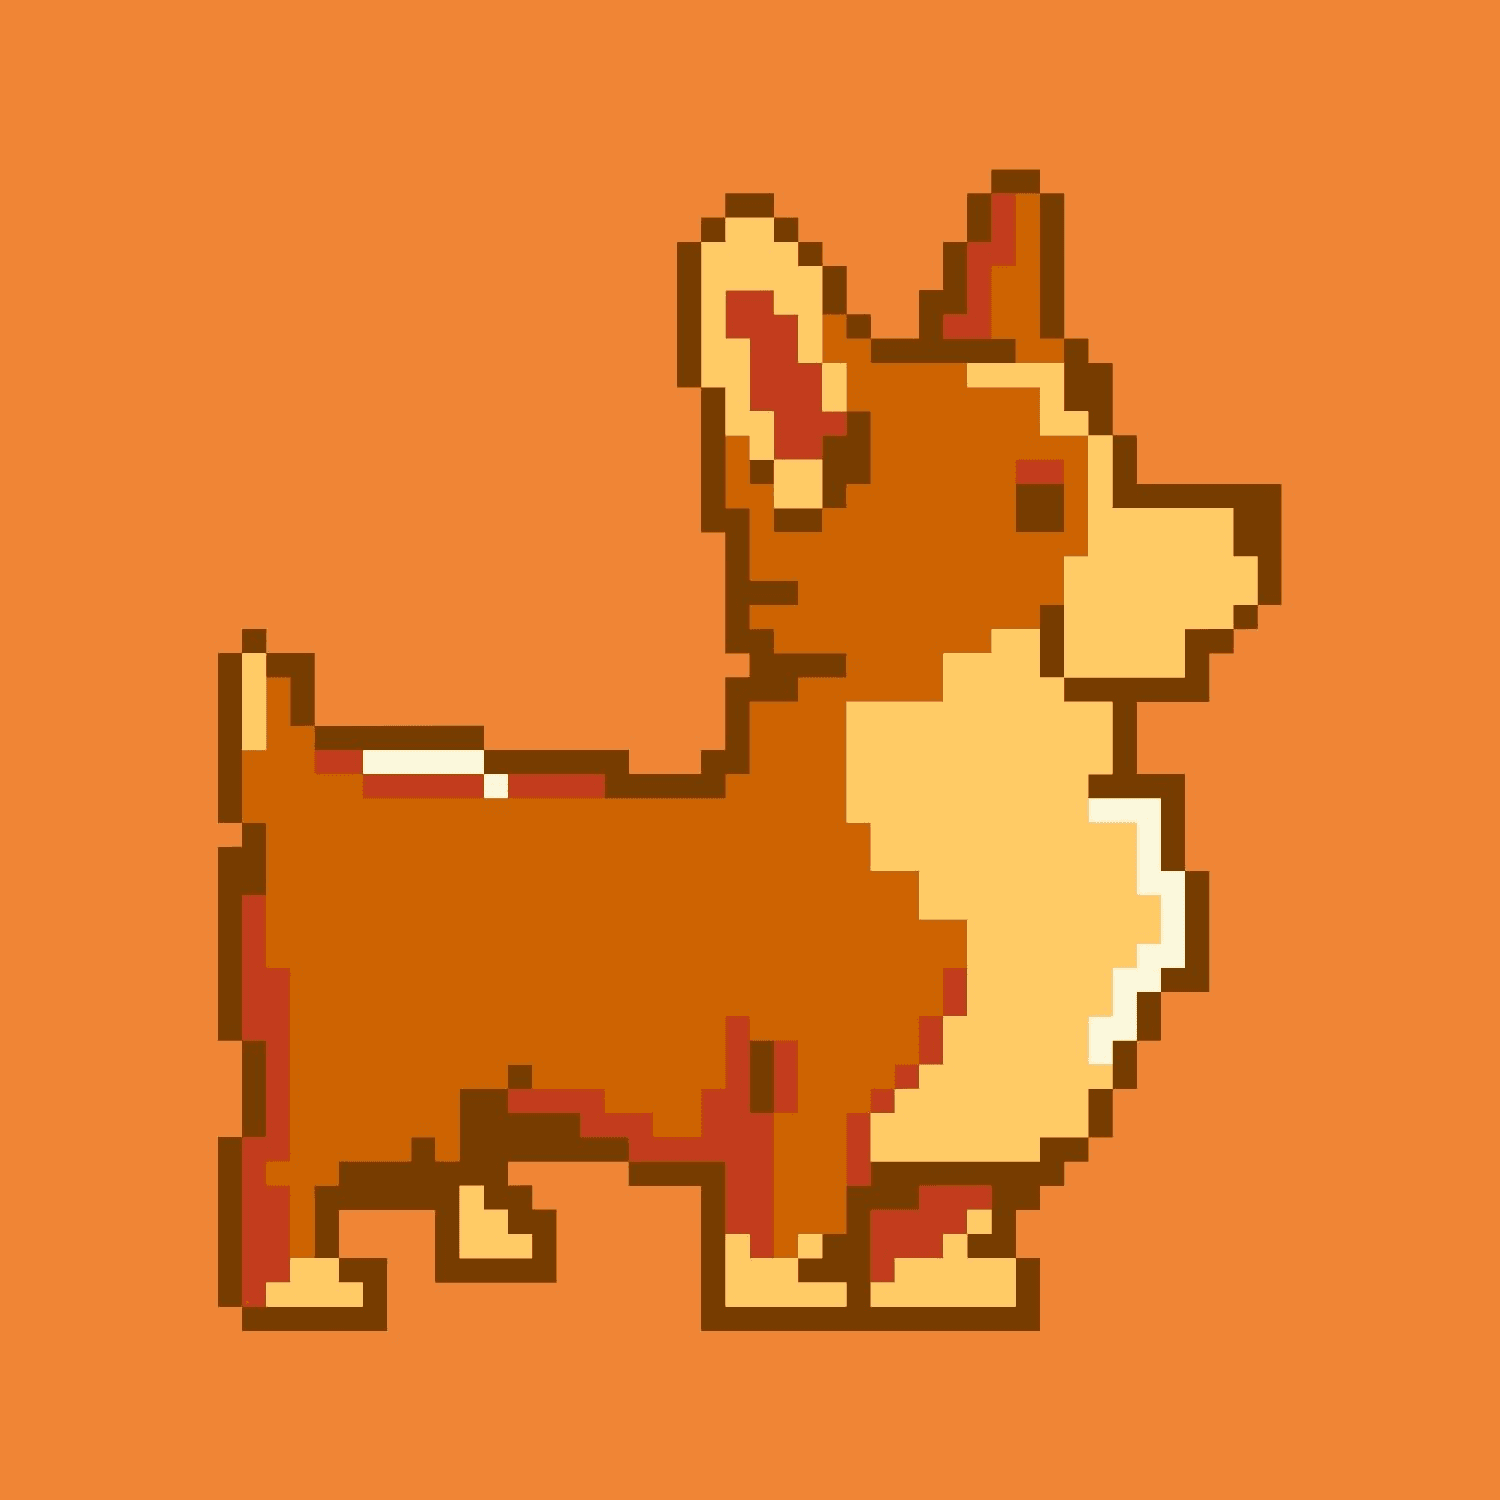 Emma Watson Pussy In Pantyhose - Pixelated Corgi #21 (Airdrop) - ðŸ”¥ Don't Miss Out on New Hot Items ðŸ”¥ -  PIXELATED CORGIS | OpenSea